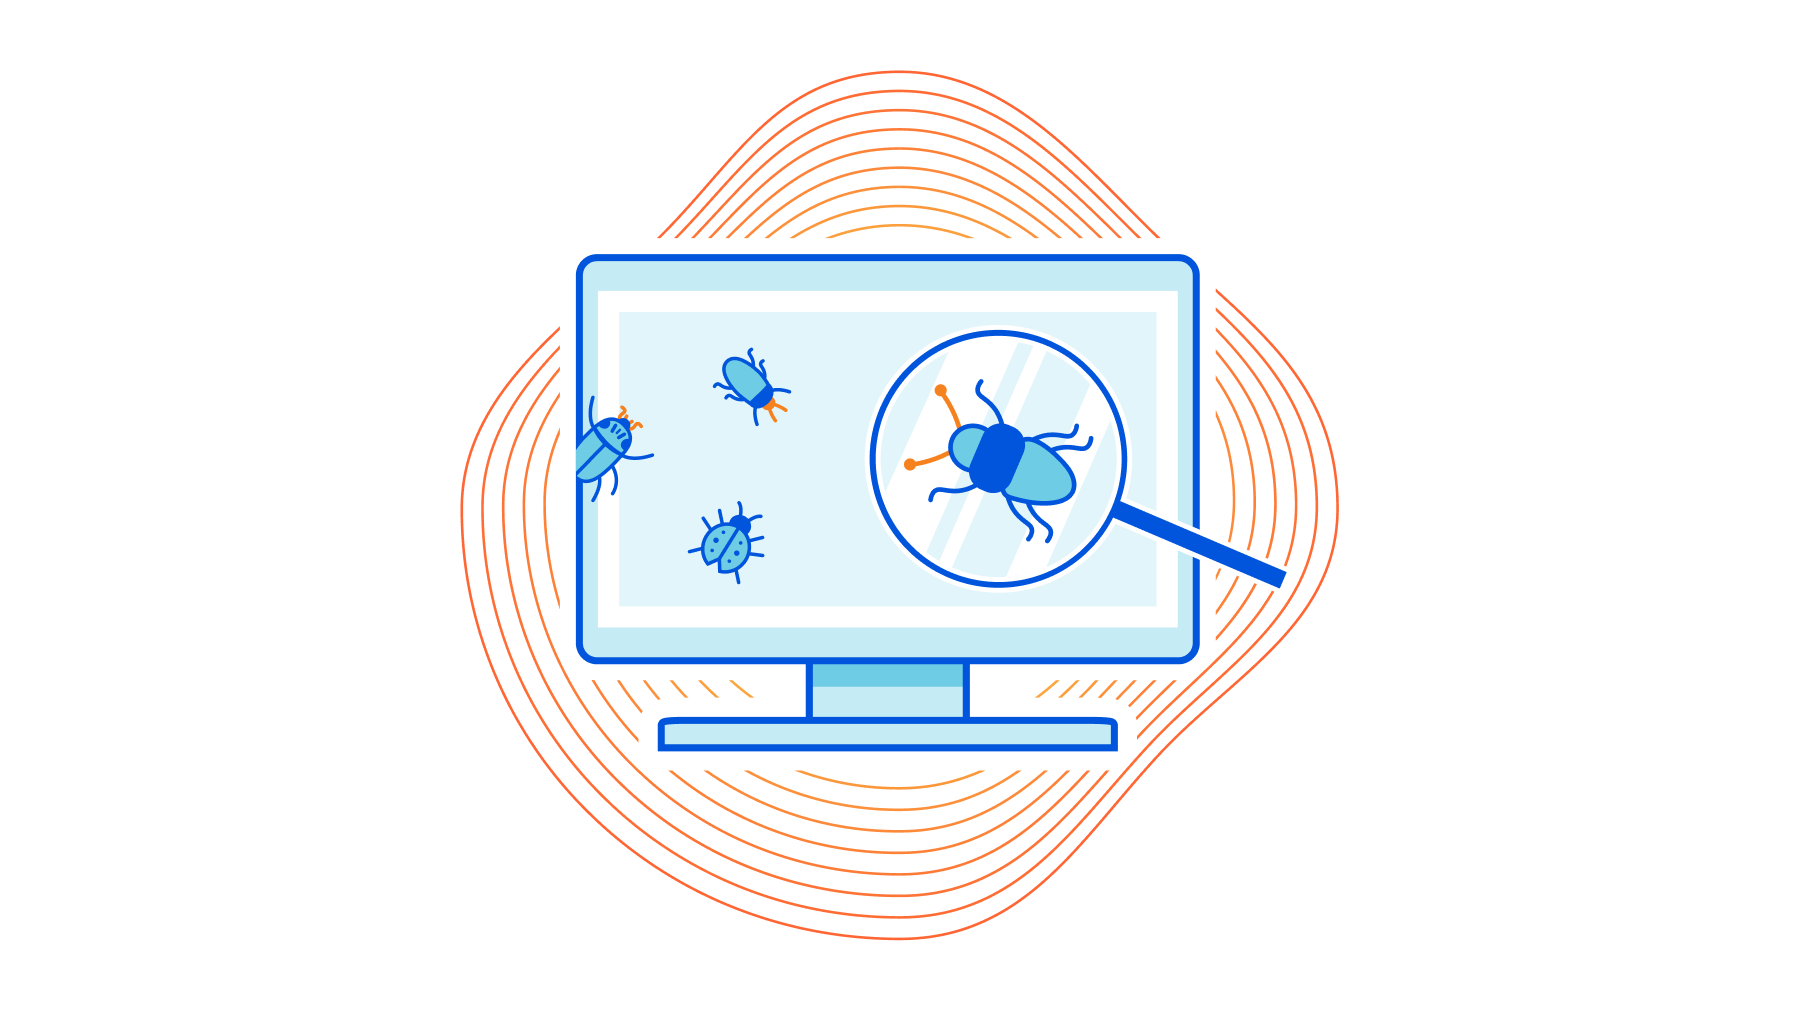 Announcing the public launch of Cloudflare's bug bounty program